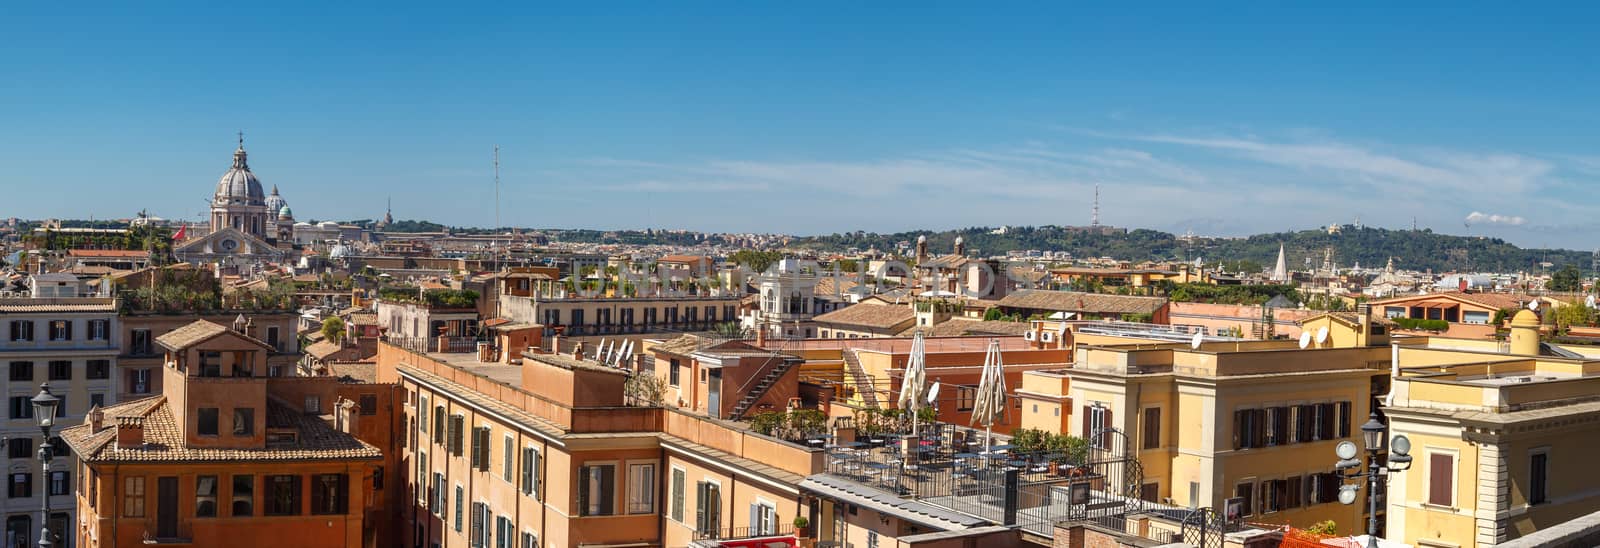 View of Rome with historical buildings from Spanish Steps, on bright blue sky background.